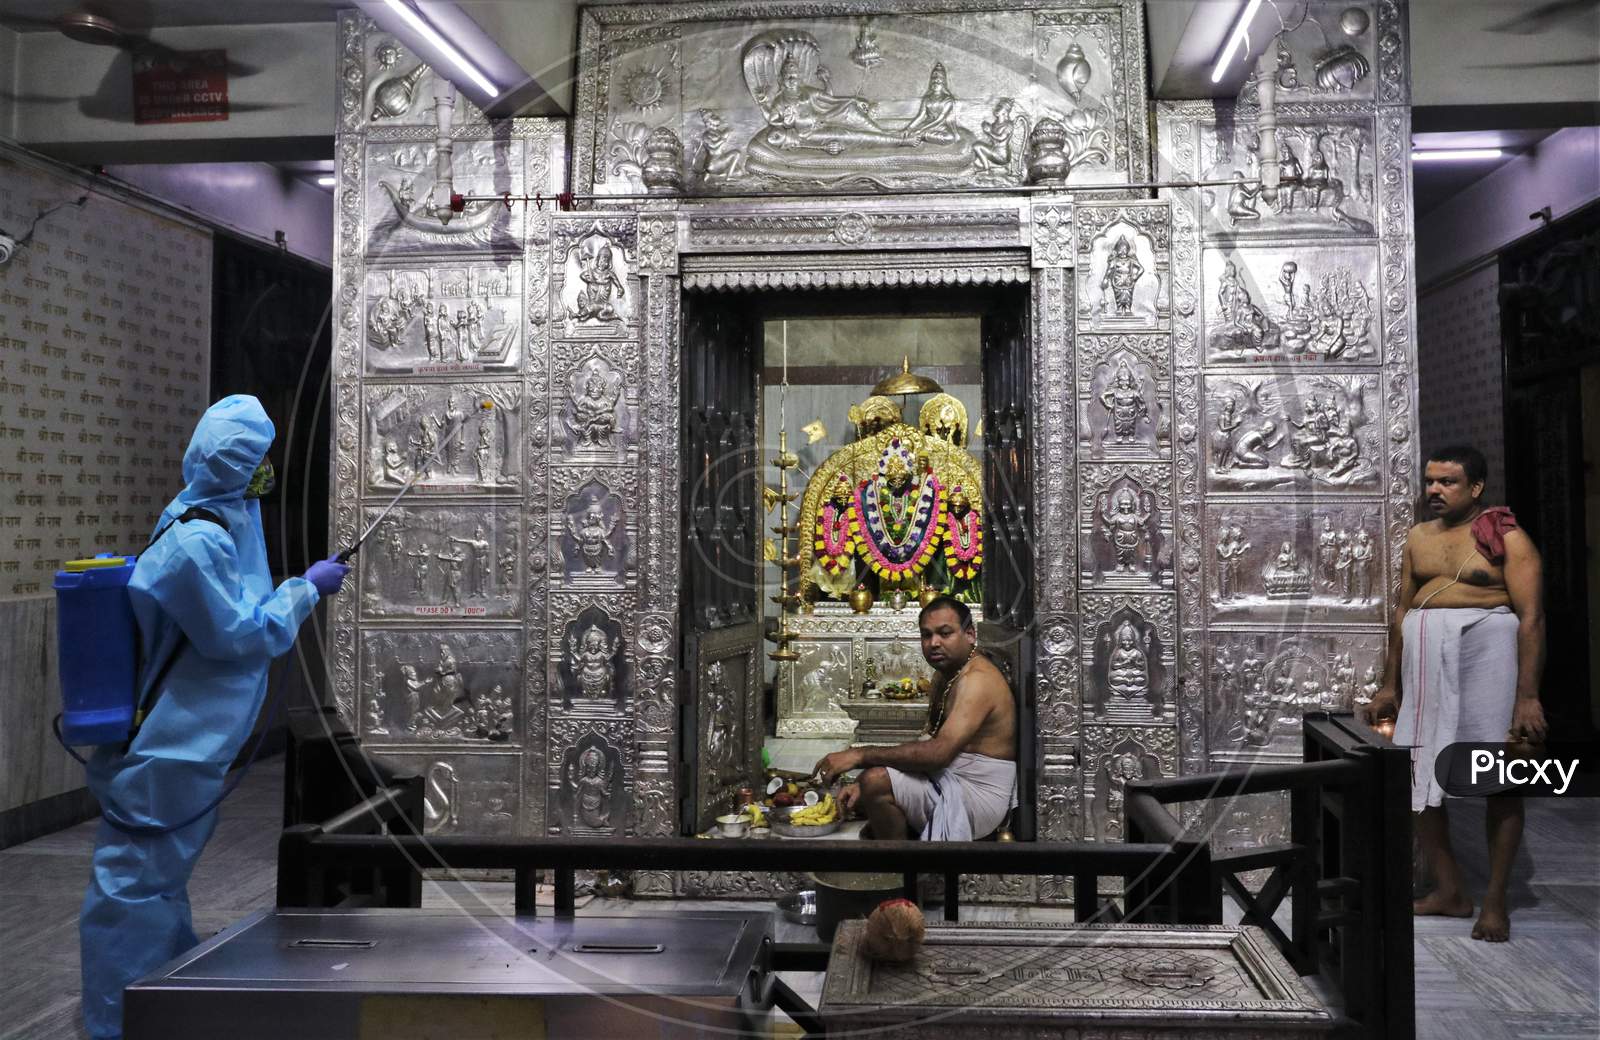 A man in personal protective equipment (PPE) sanitizes a temple before they reopen for the public amid the spread of the coronavirus disease (COVID-19) in Mumbai, India on November 15, 2020.